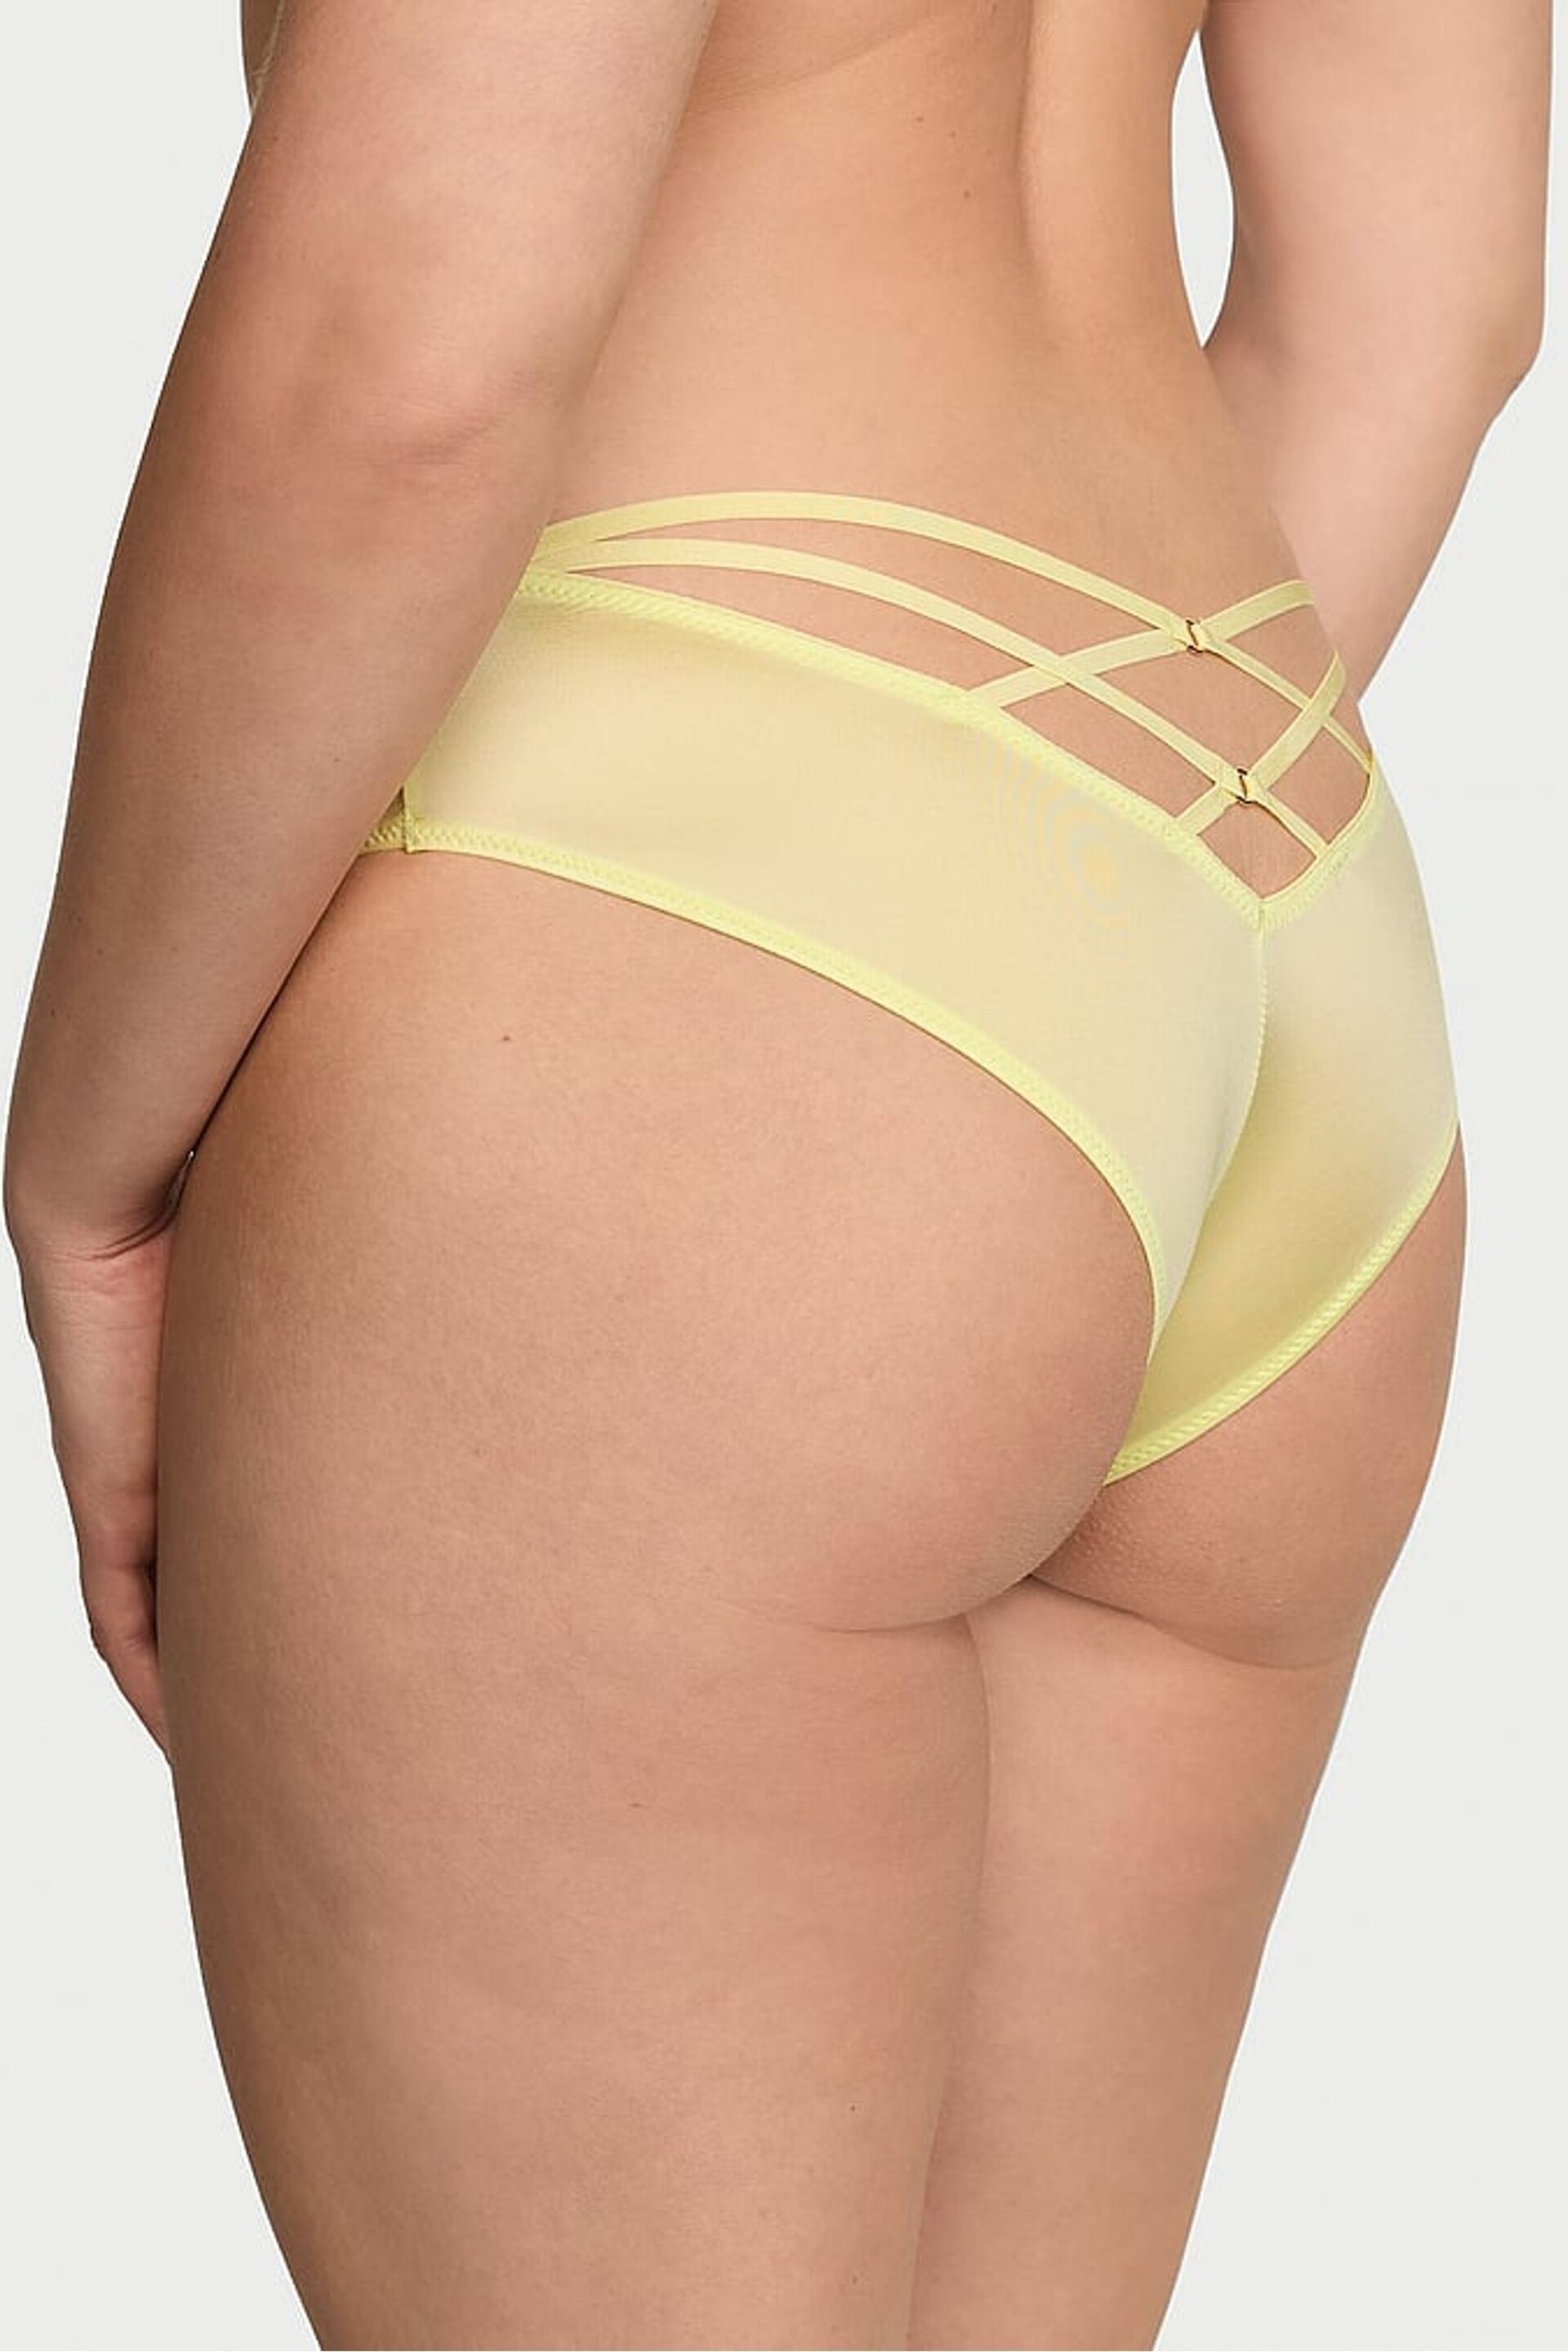 Victoria's Secret Citron Glow Yellow Cheeky Knickers - Image 2 of 3